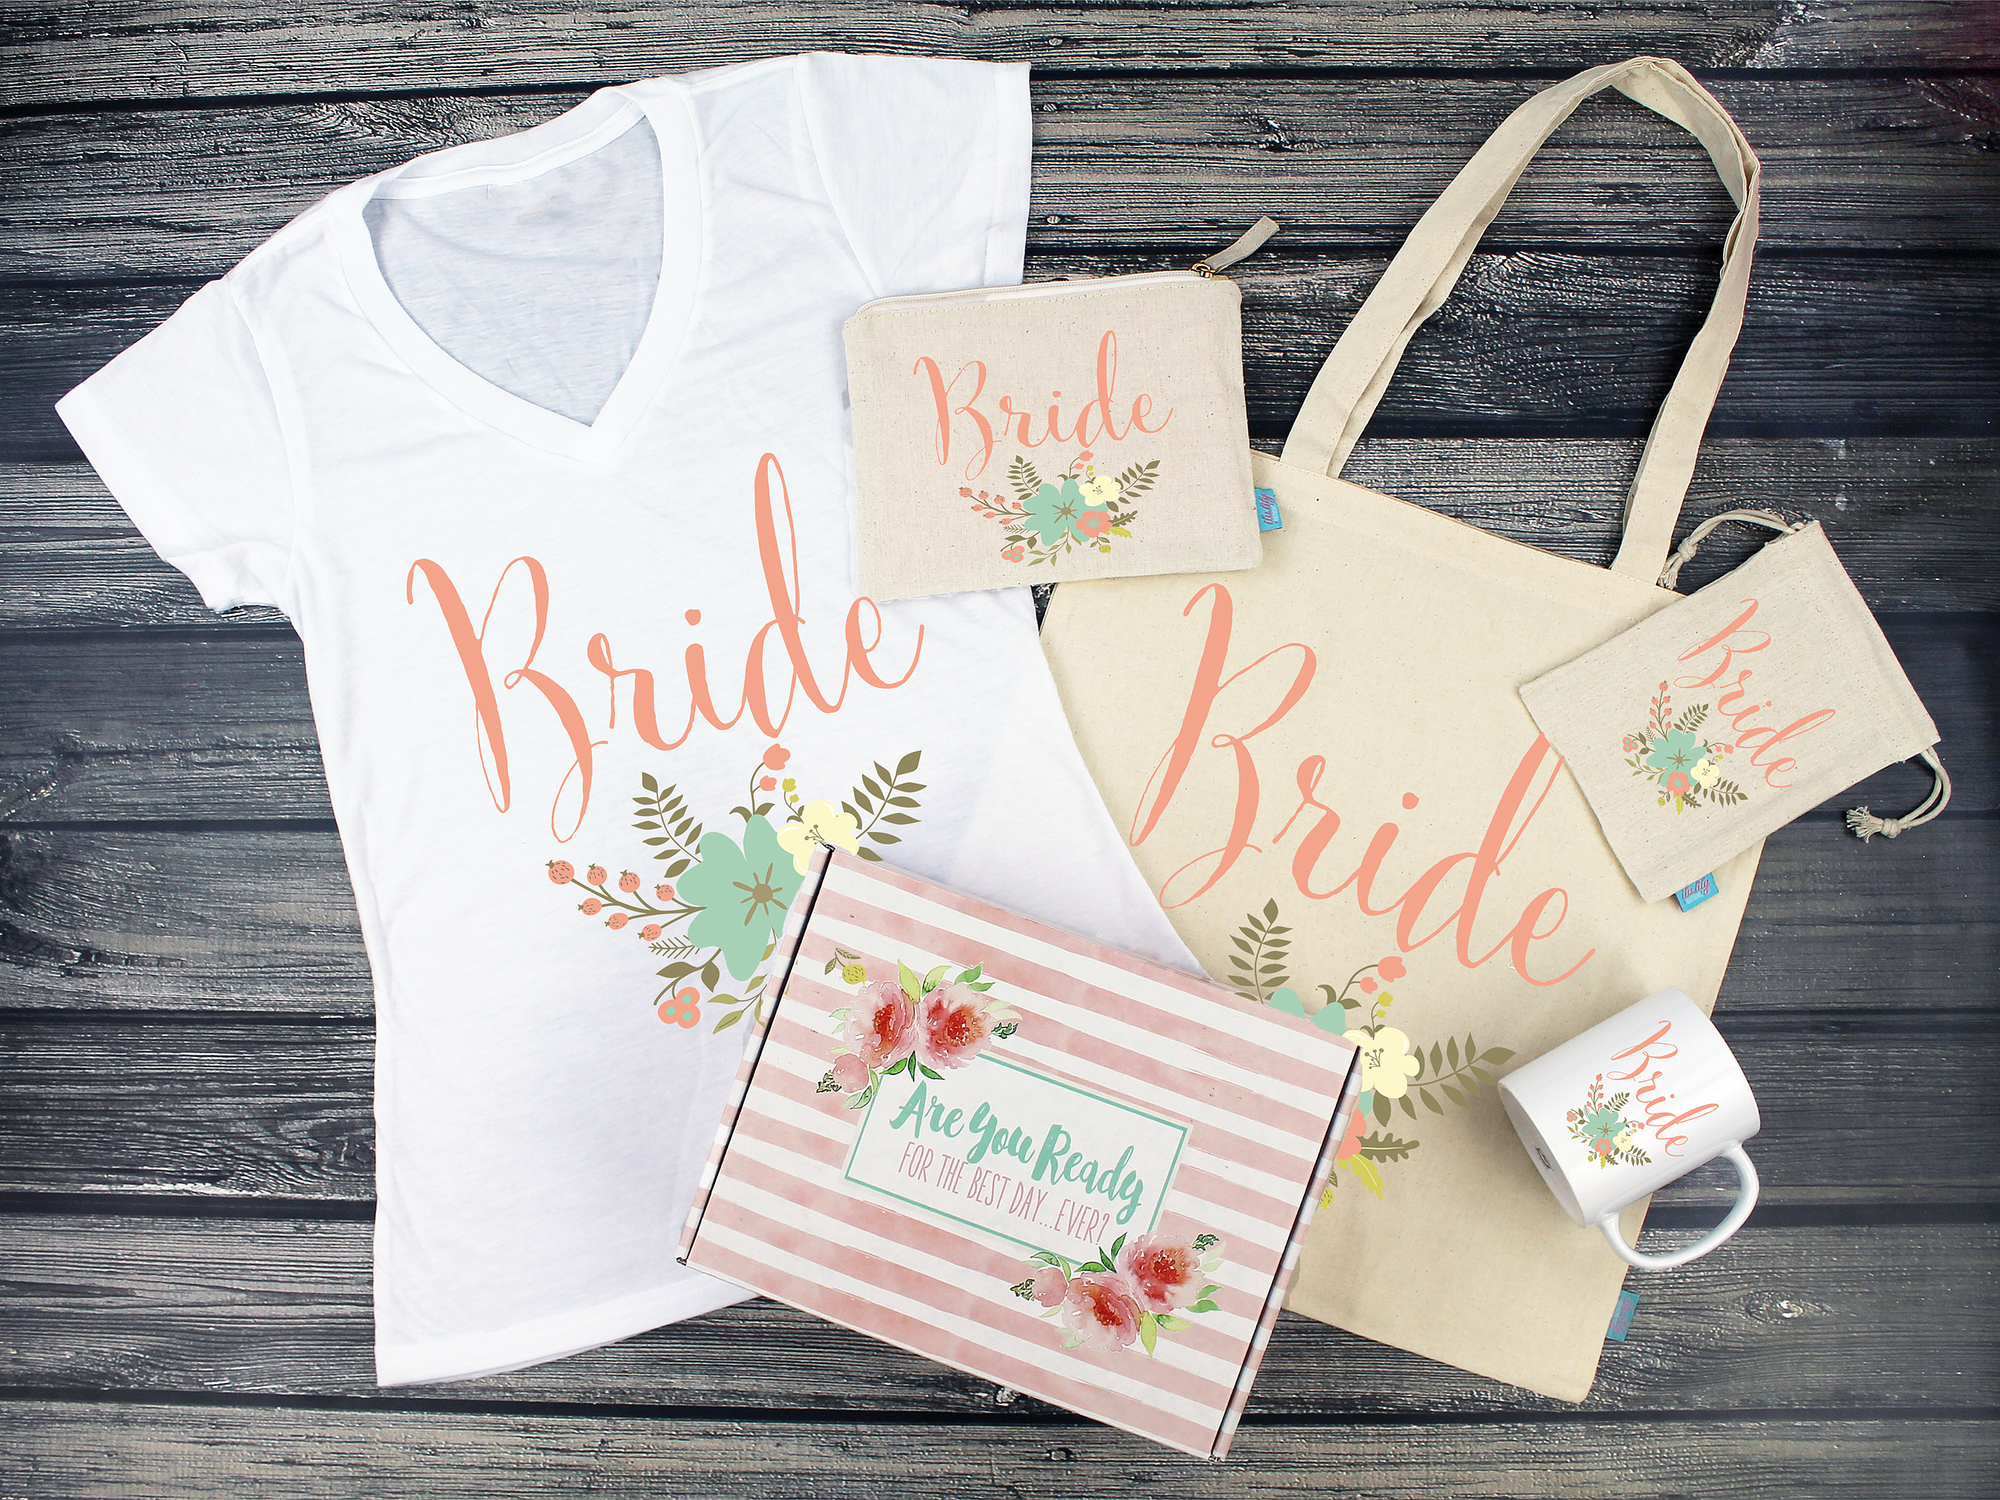 Bride Gift Box | Bride to Be Gift | Floral Chic Bride